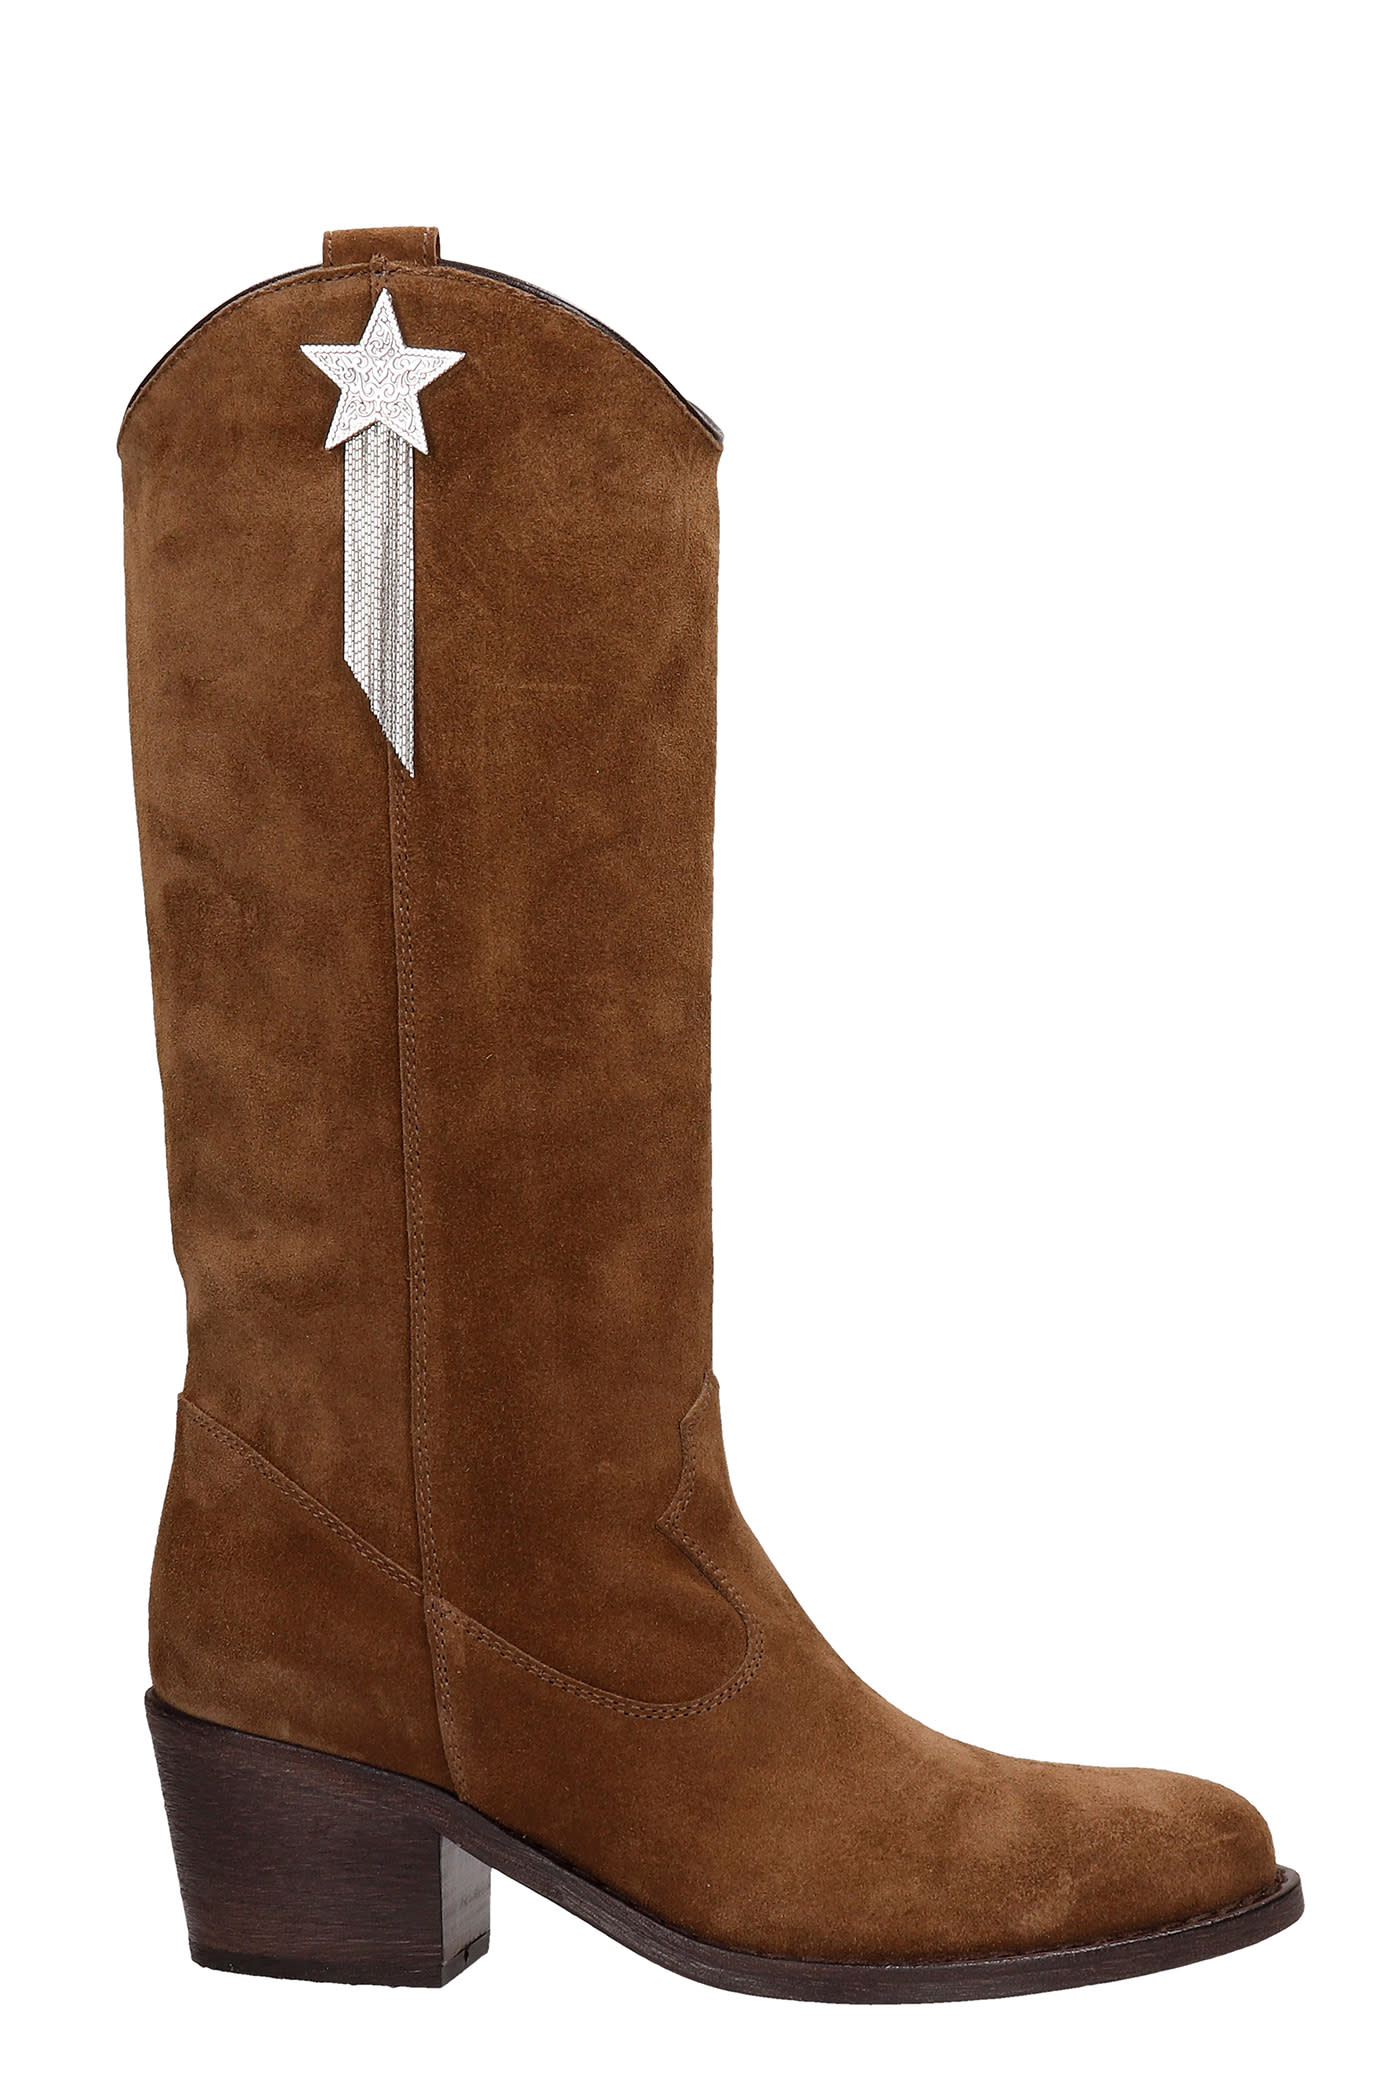 Via Roma 15 Texan Boots In Brown Suede